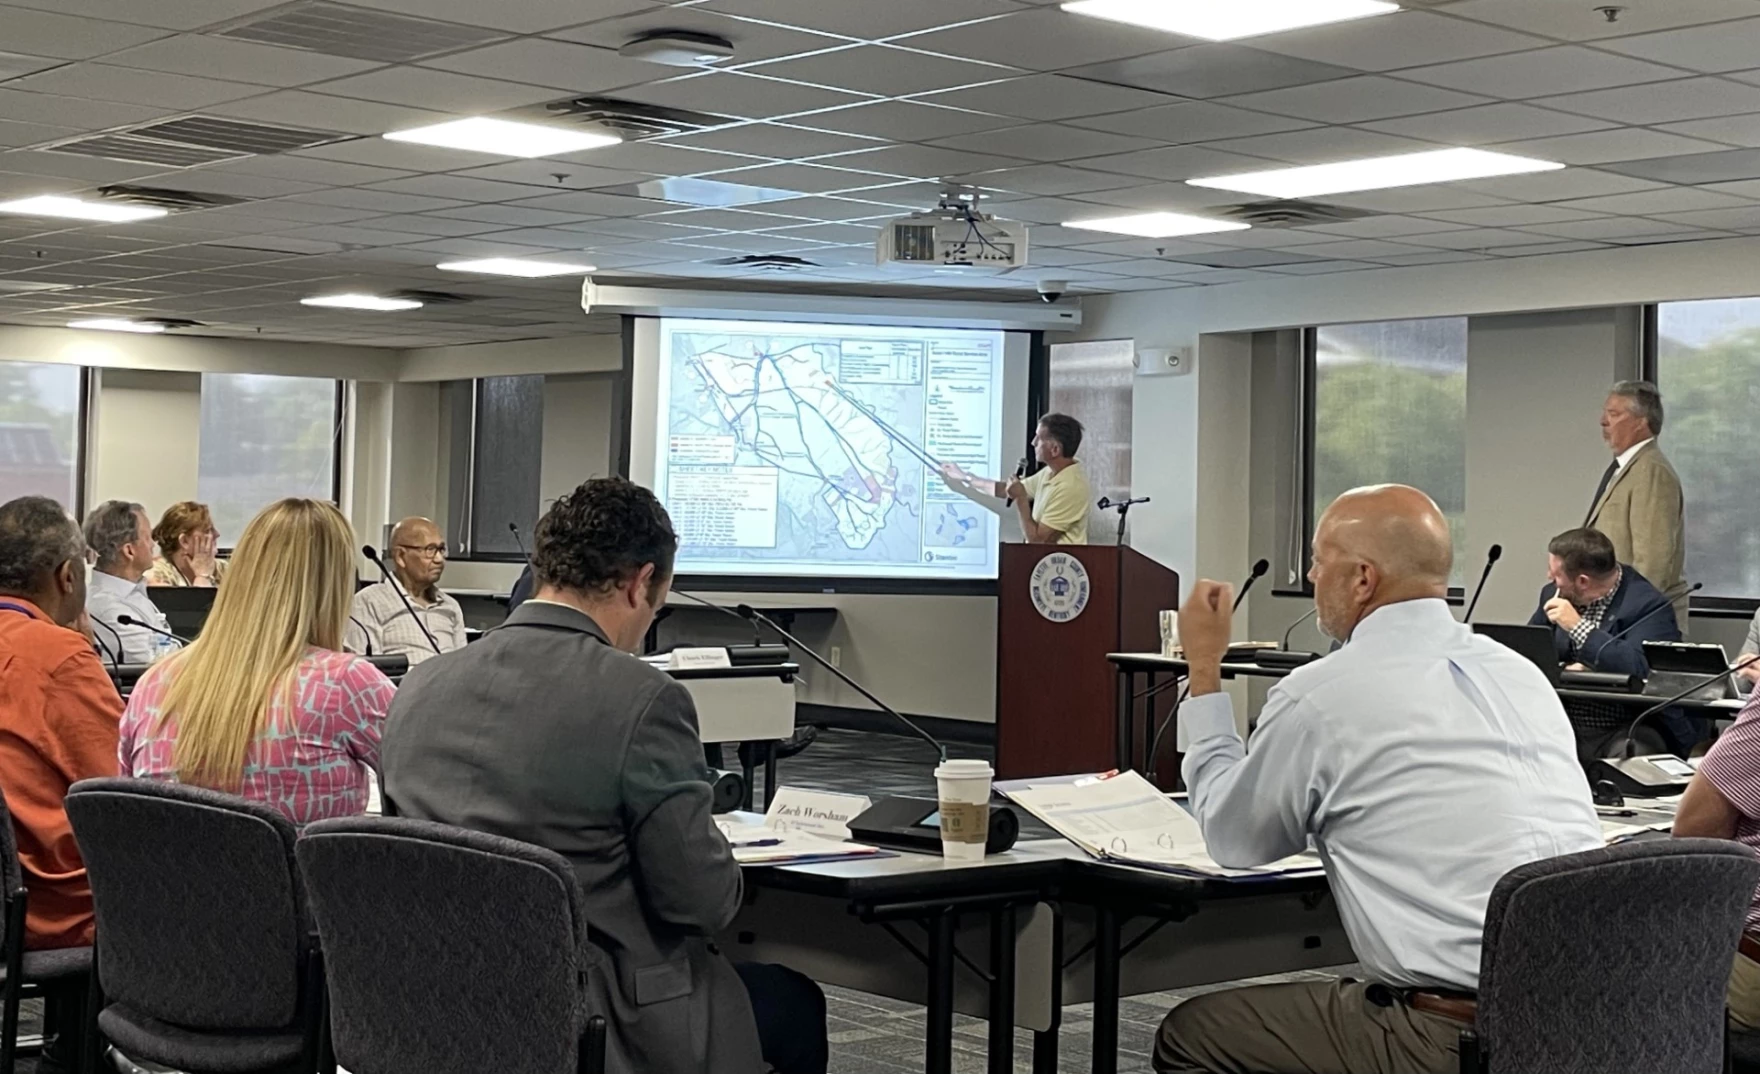 Lexington growth management advisory group mapping out land use options